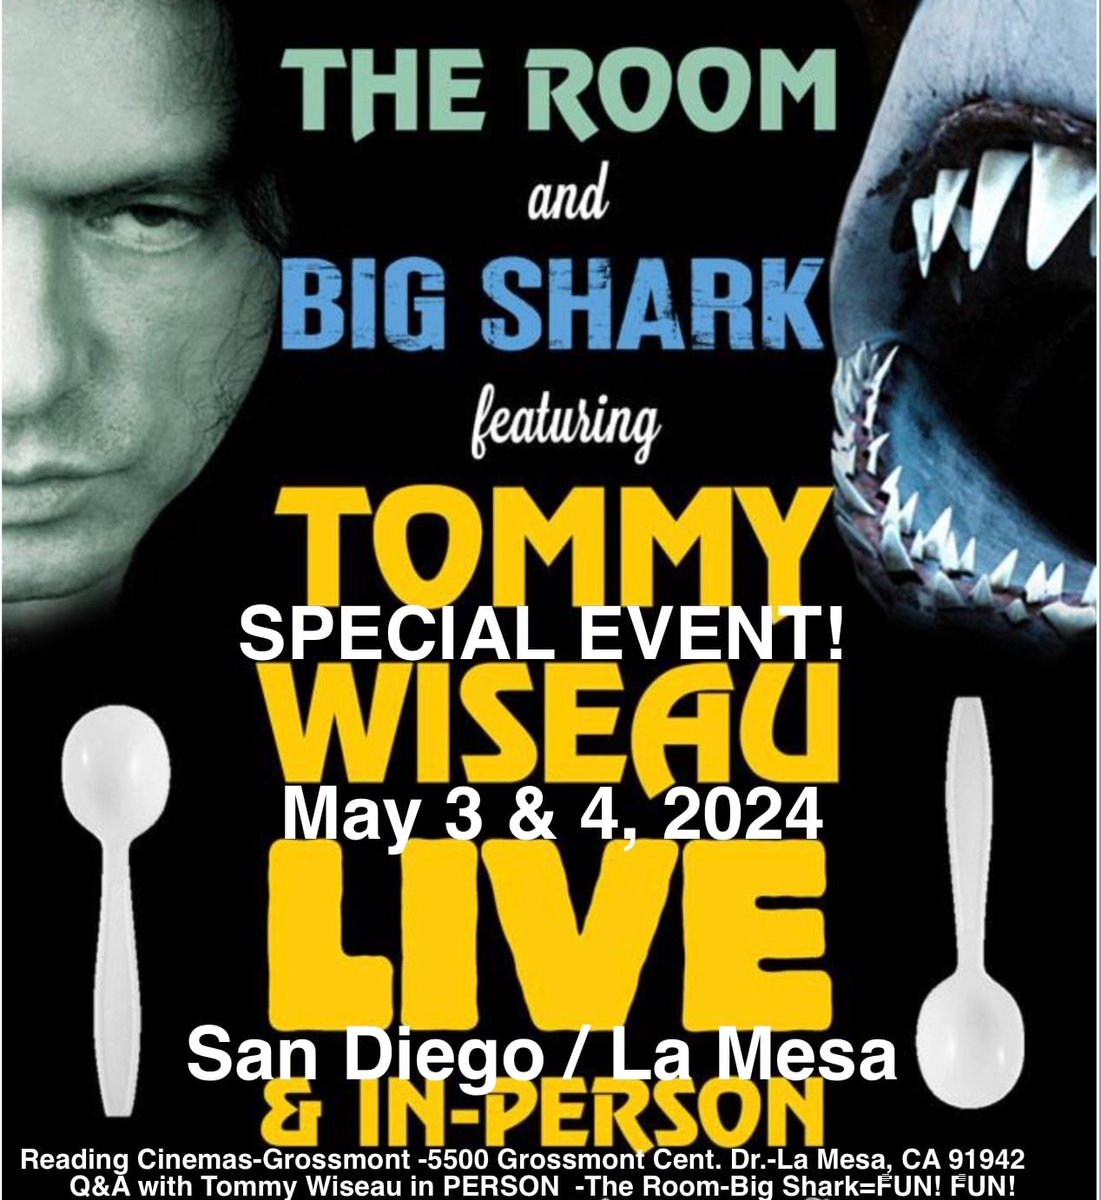 SAN DIEGO !!! SEE THE NEWEST VERSION OF BIG SHARK IN 4 DAYS !!! & OR THE ROOM !!! JOIN ME FOR LIVE Q&A !!! MIRACLES AND MAGIC FOR ALL !! San Diego (La Mesa) THE ROOM + Q&A May 3,4 readingcinemas.com/grossmont/movi… BIG SHARK + Q&A May 3,4 readingcinemas.com/grossmont/movi…